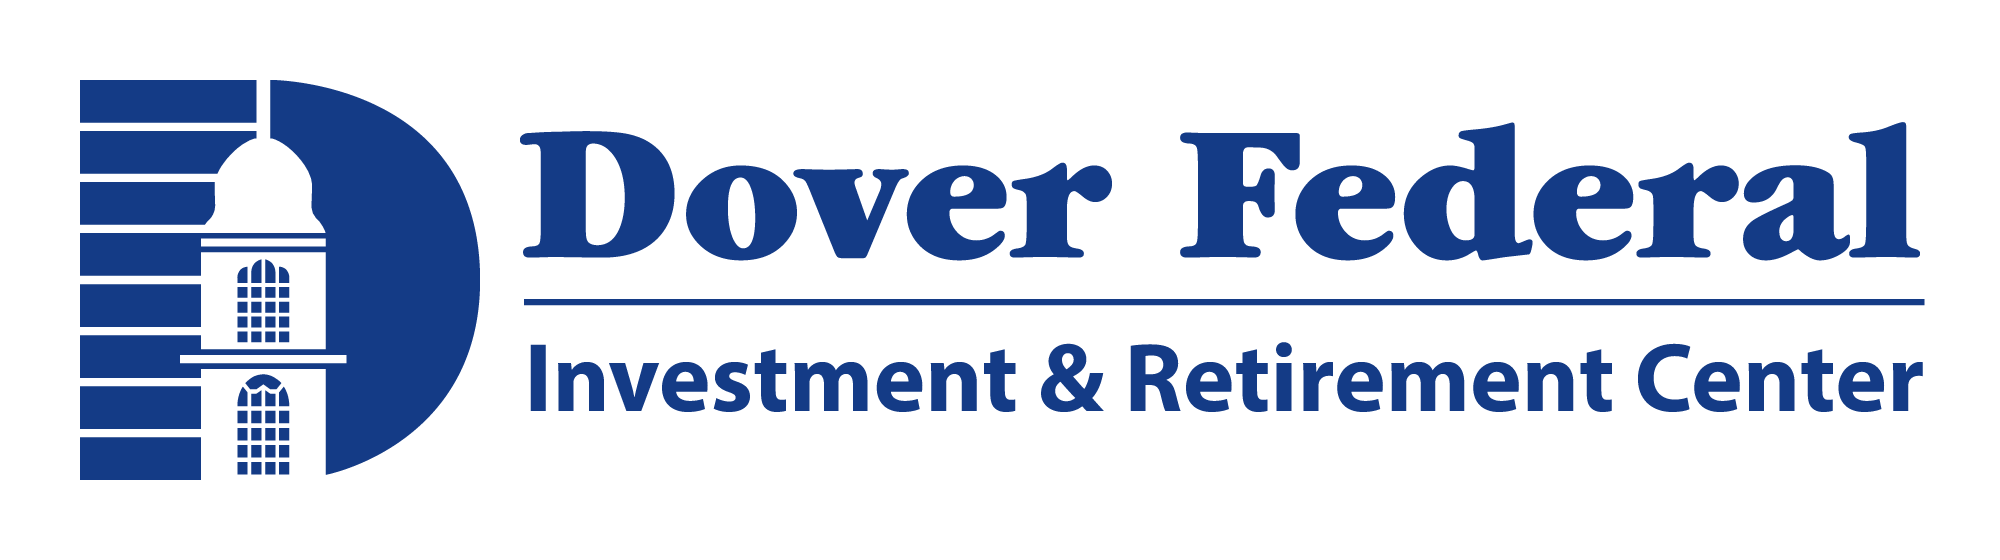 Investment Planning from Dover Federal Credit Union, Serving Delaware families, businesses and you!